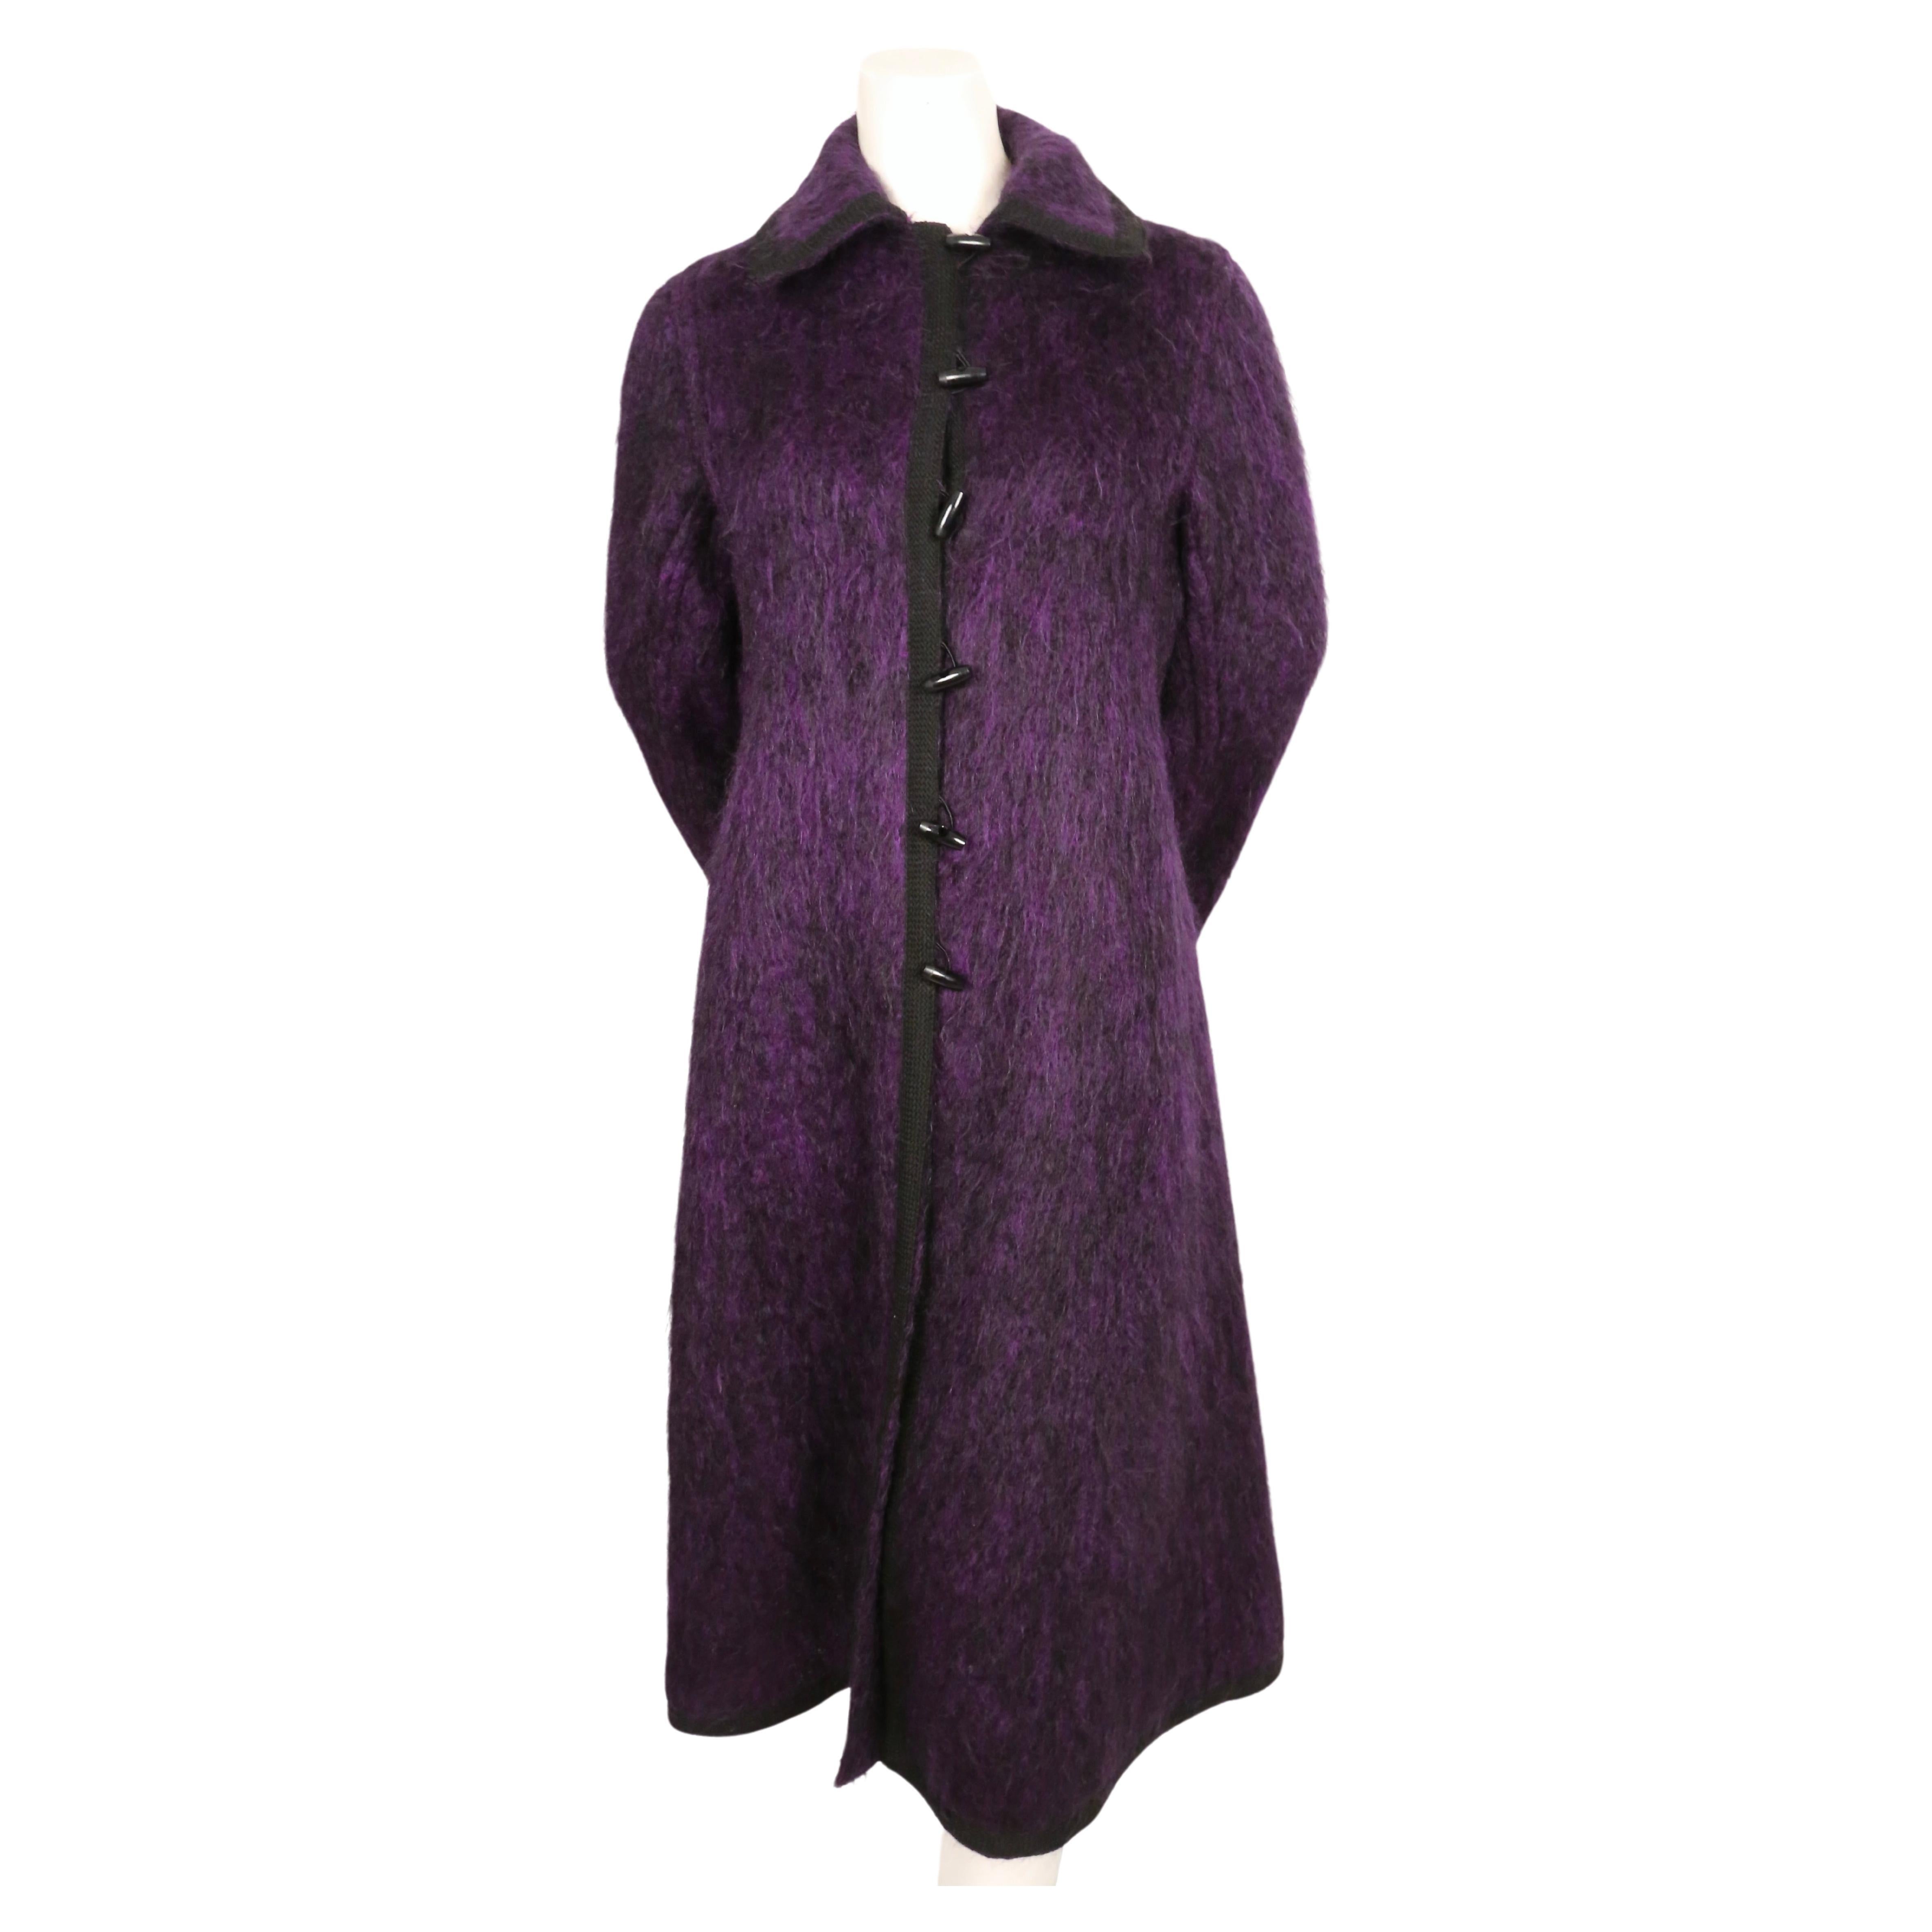 Dramatic, violet-purple, brushed-wool coat with black braided trim and toggle buttons from Yves Saint Laurent dating to the late 1960's. Coat has an A-line shape. Labeled a French size 40. Approximate measurements: inset shoulders 14.5